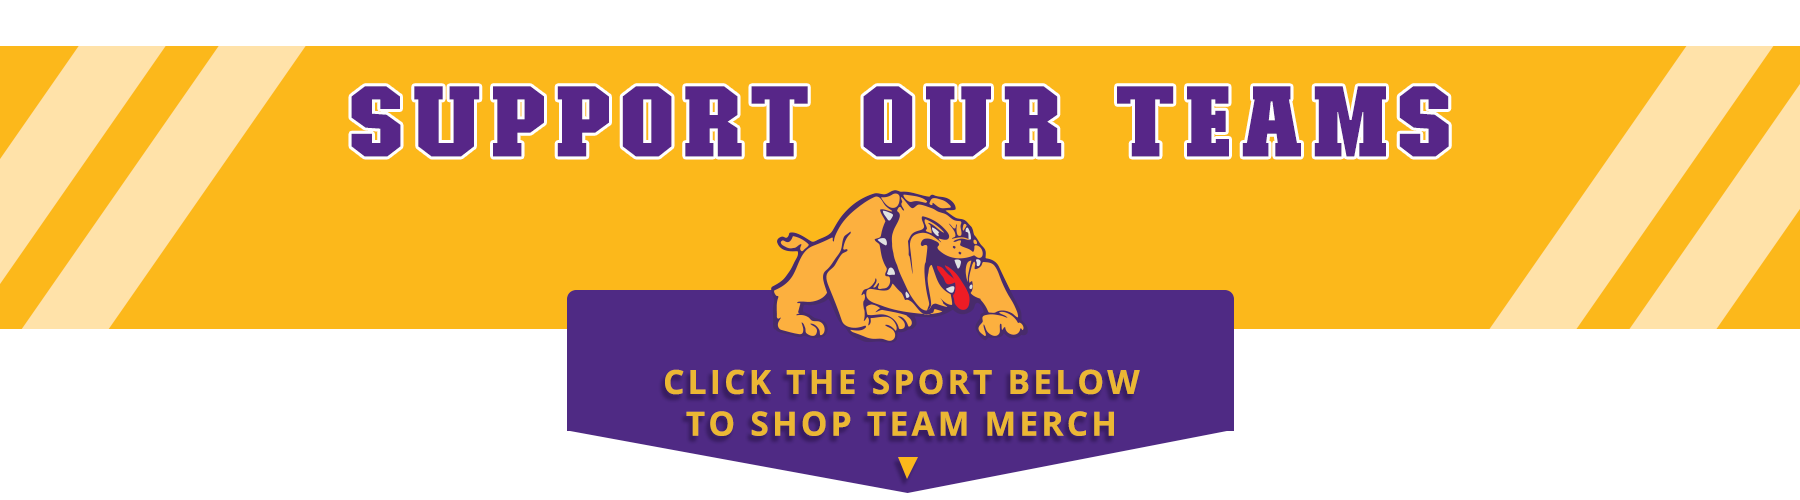 Support our teams. Click the sport below to shop team merch 